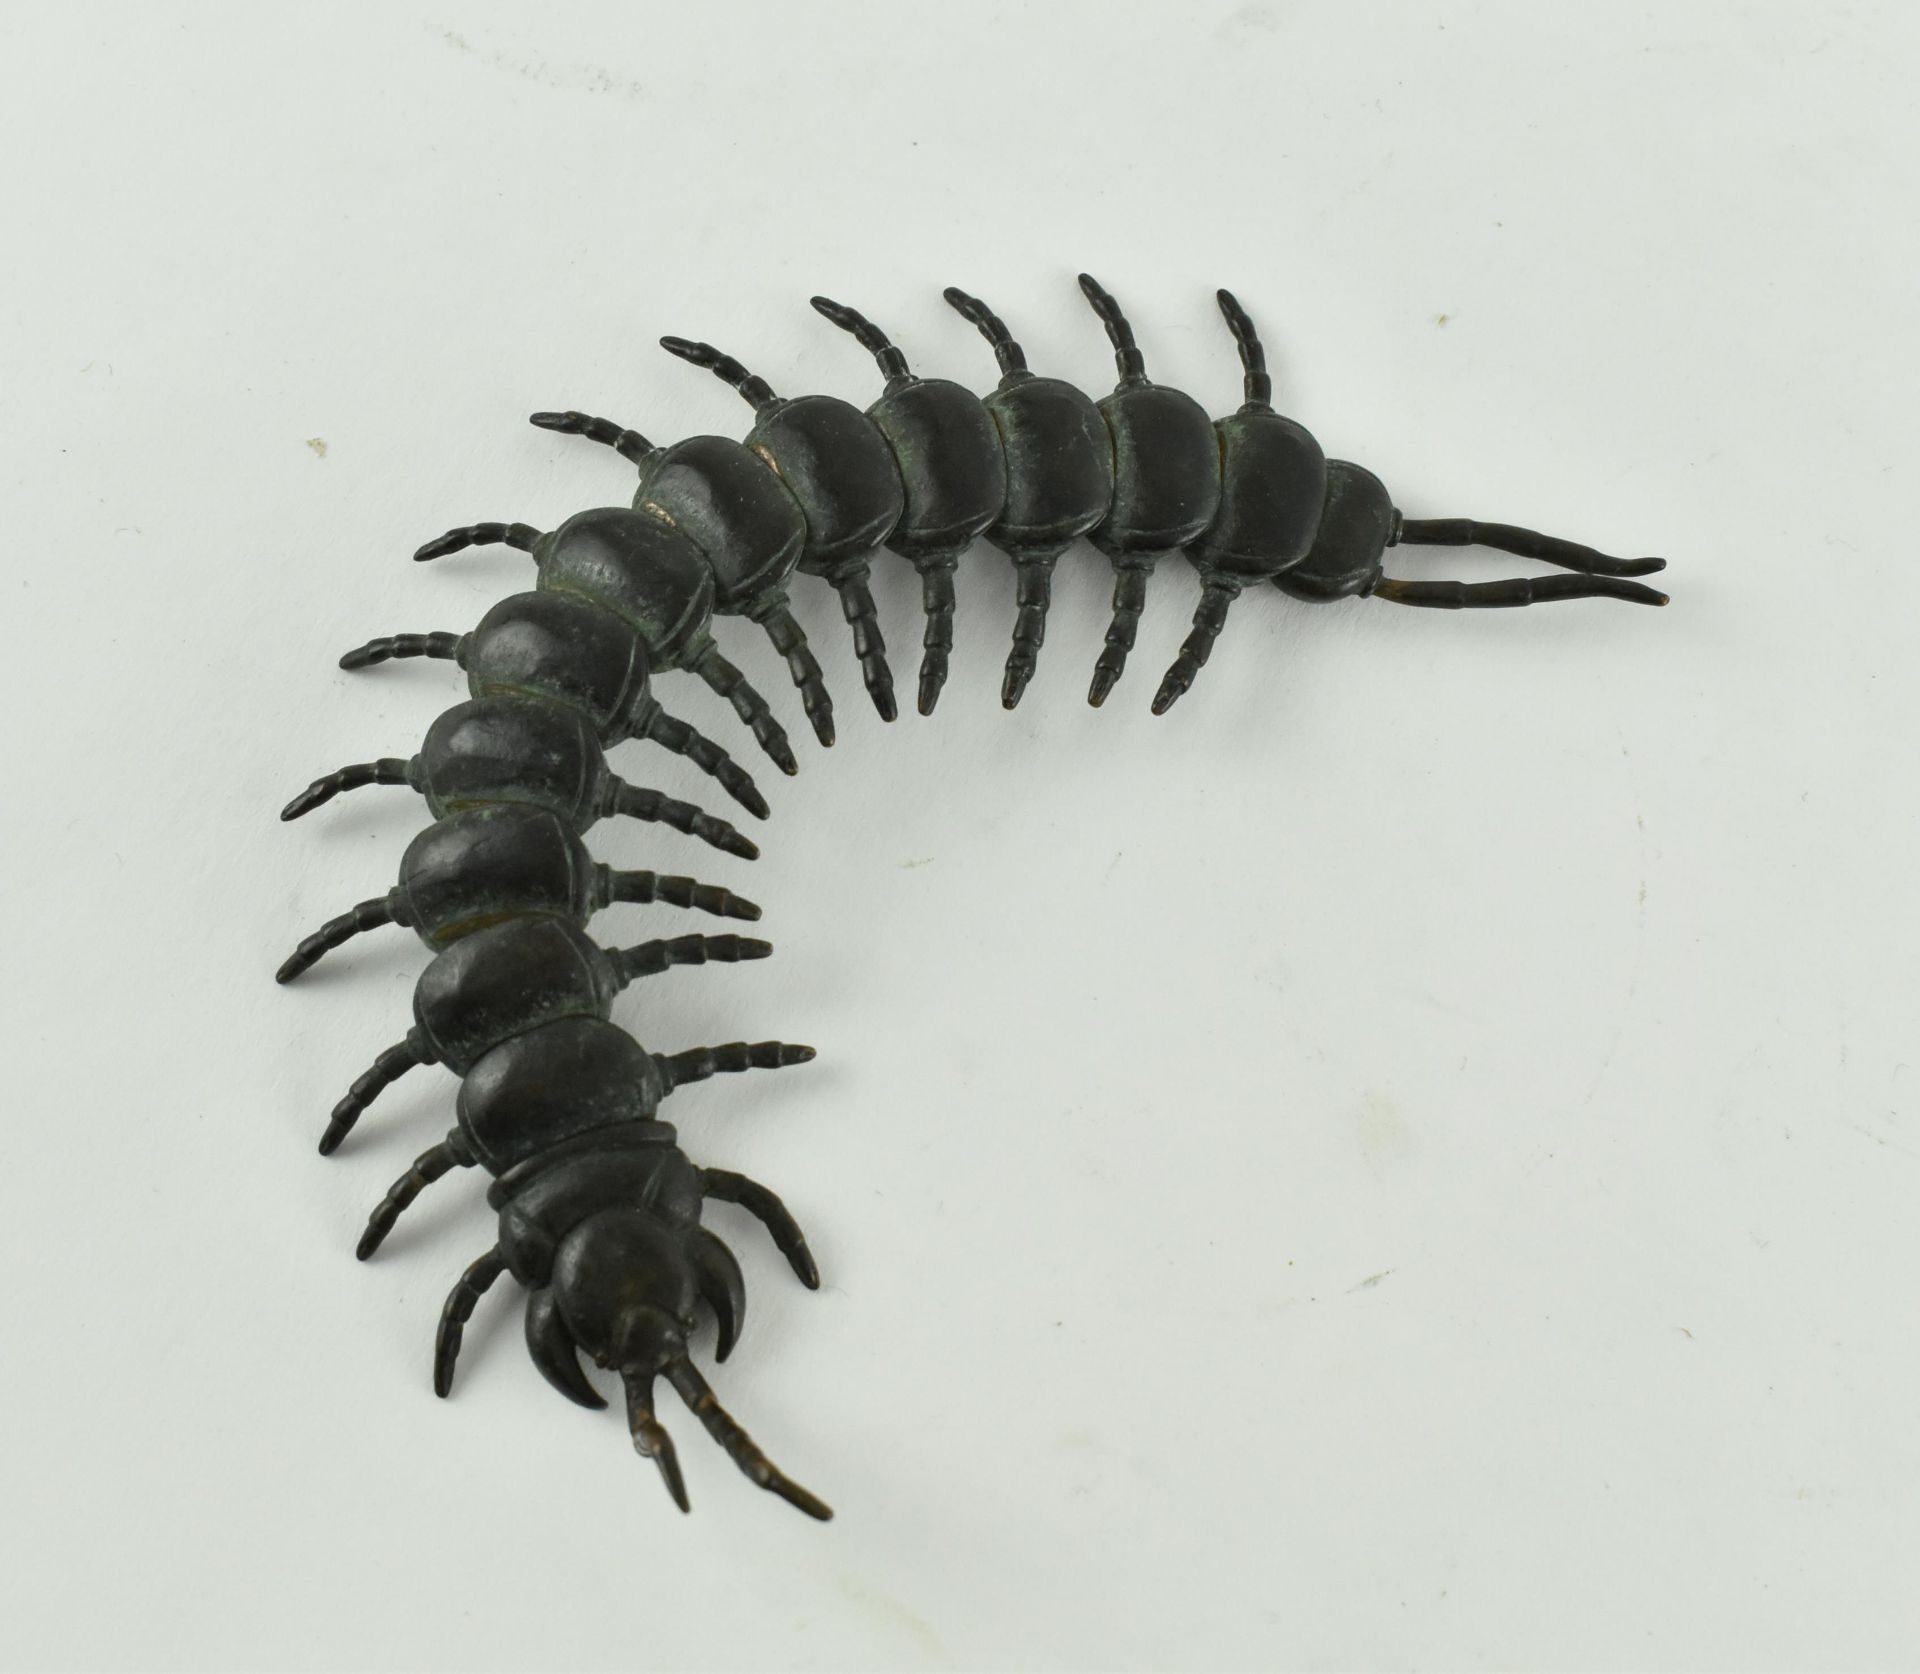 19TH CENTURY JAPANESE BRONZE ARTICULATED CENTIPEDE - Image 4 of 5